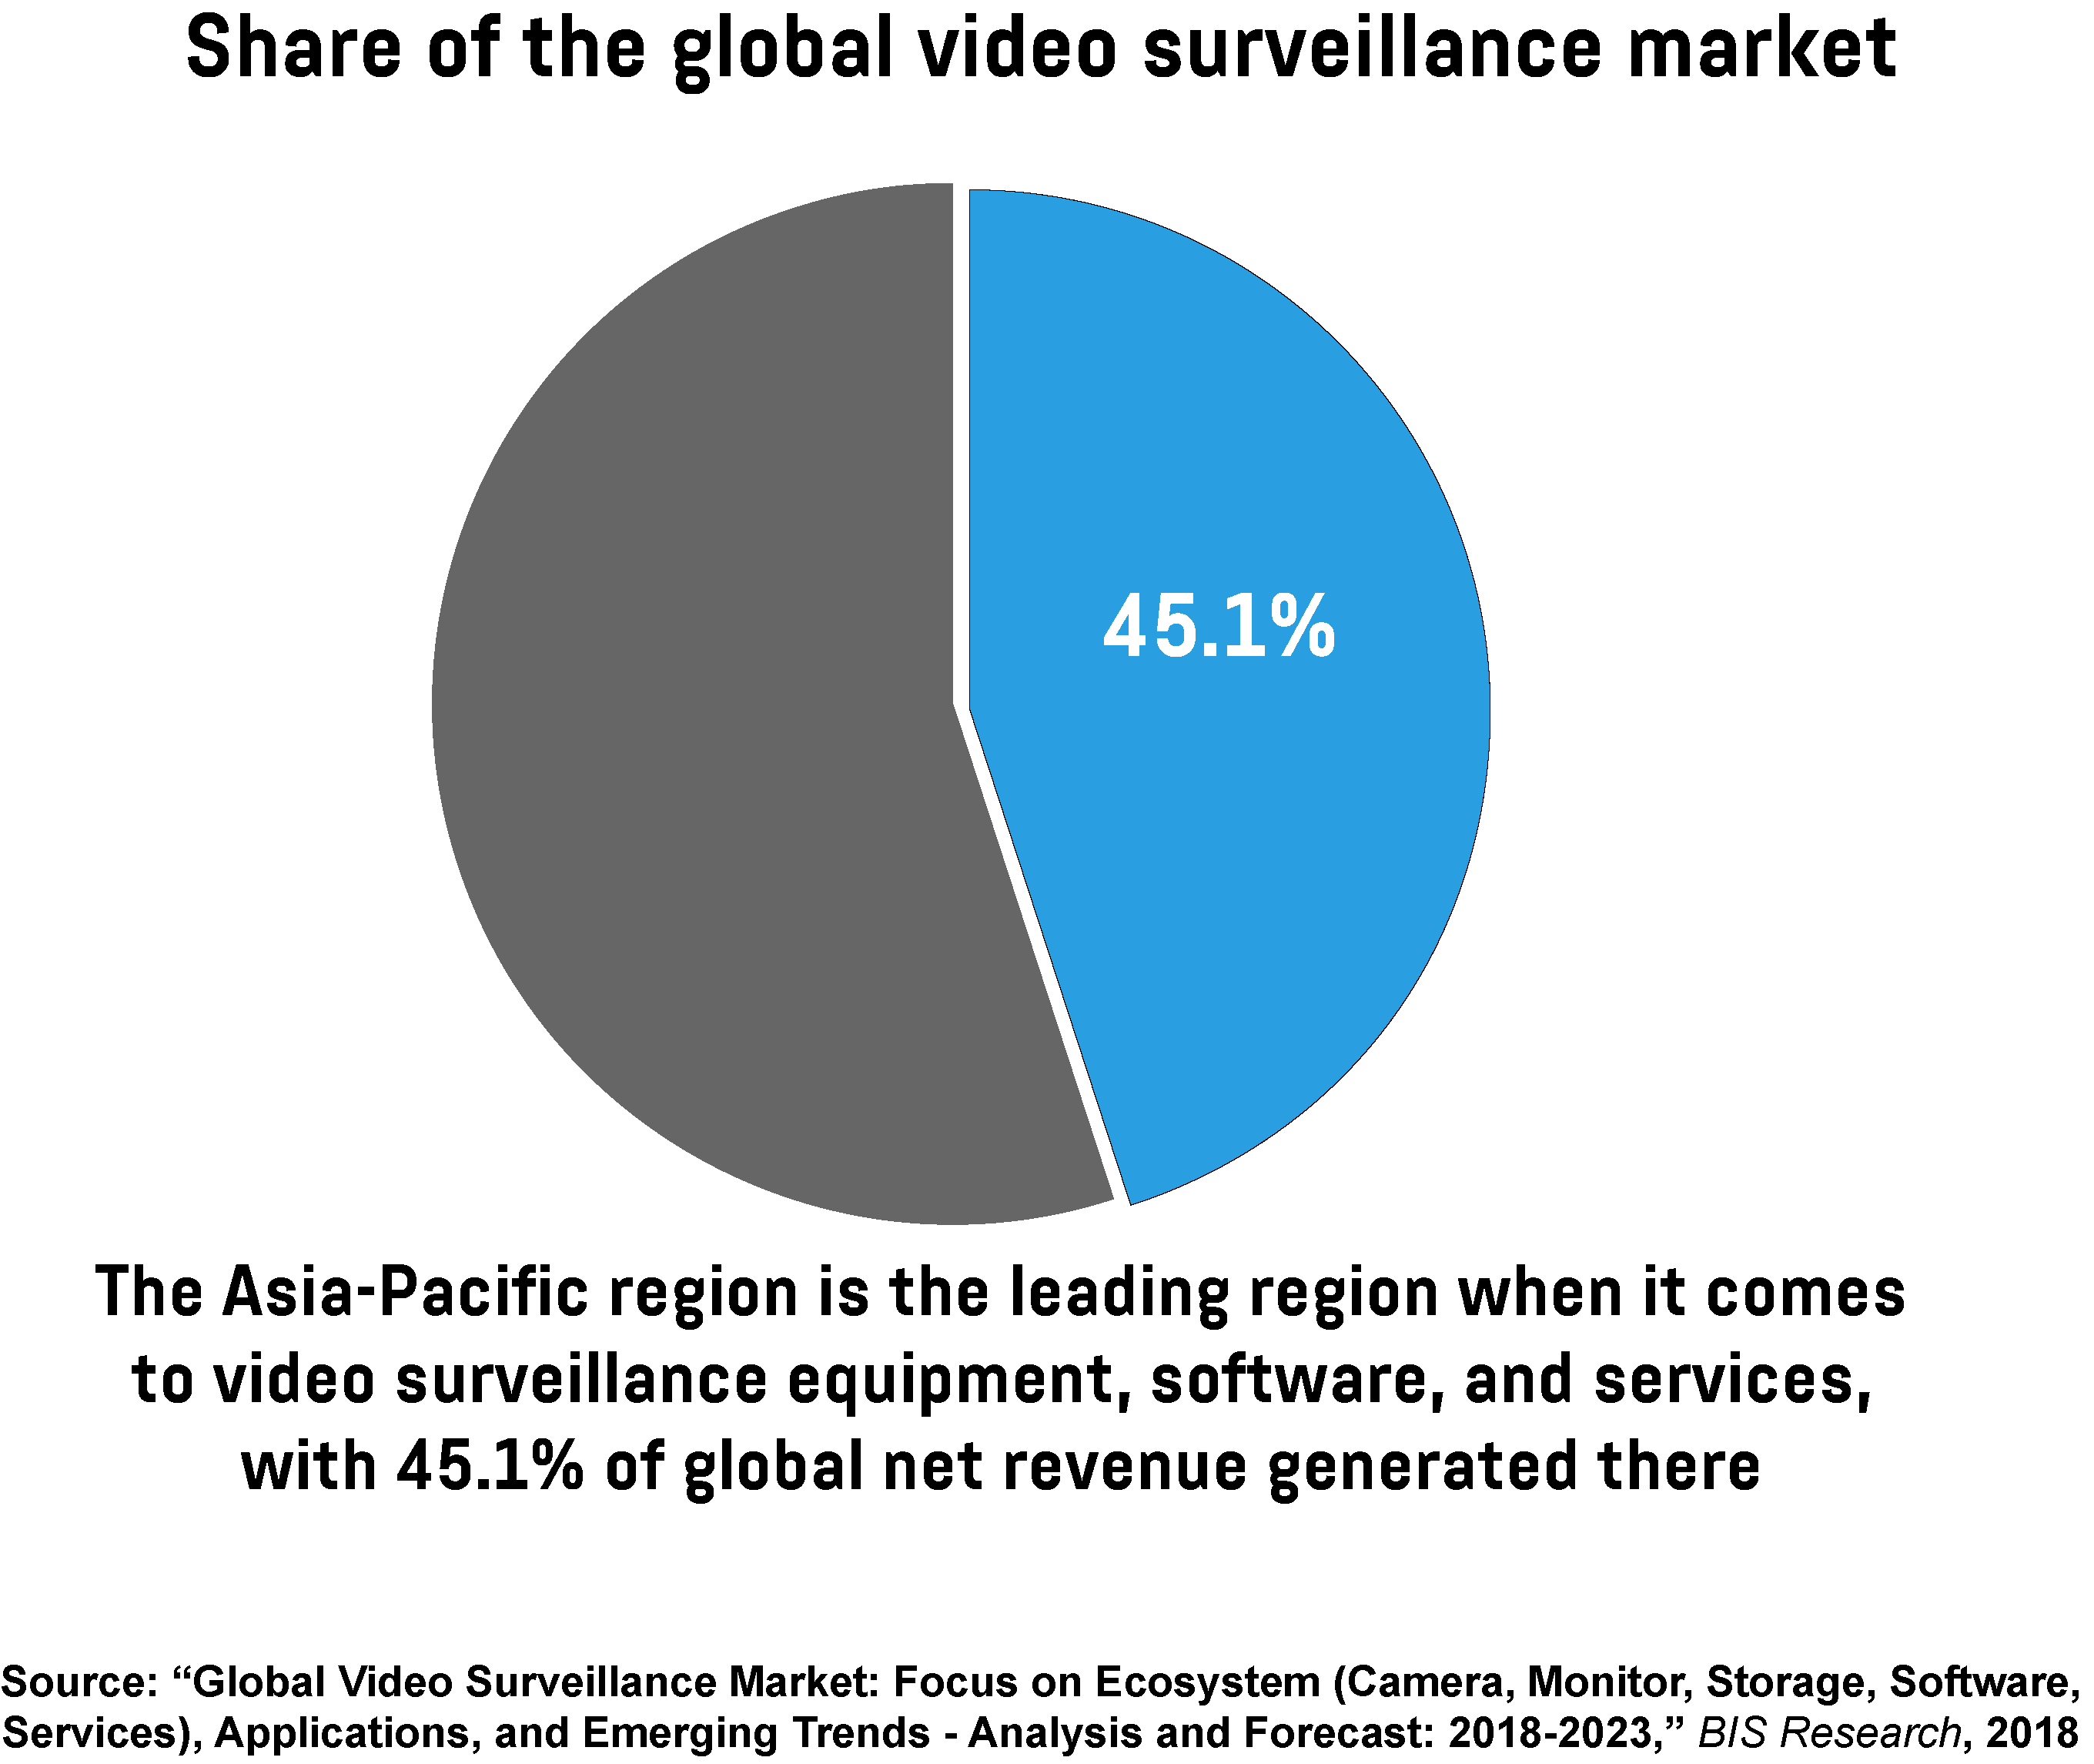 Pie chart showing the Asia-Pacific region’s share in the global video surveillance market.